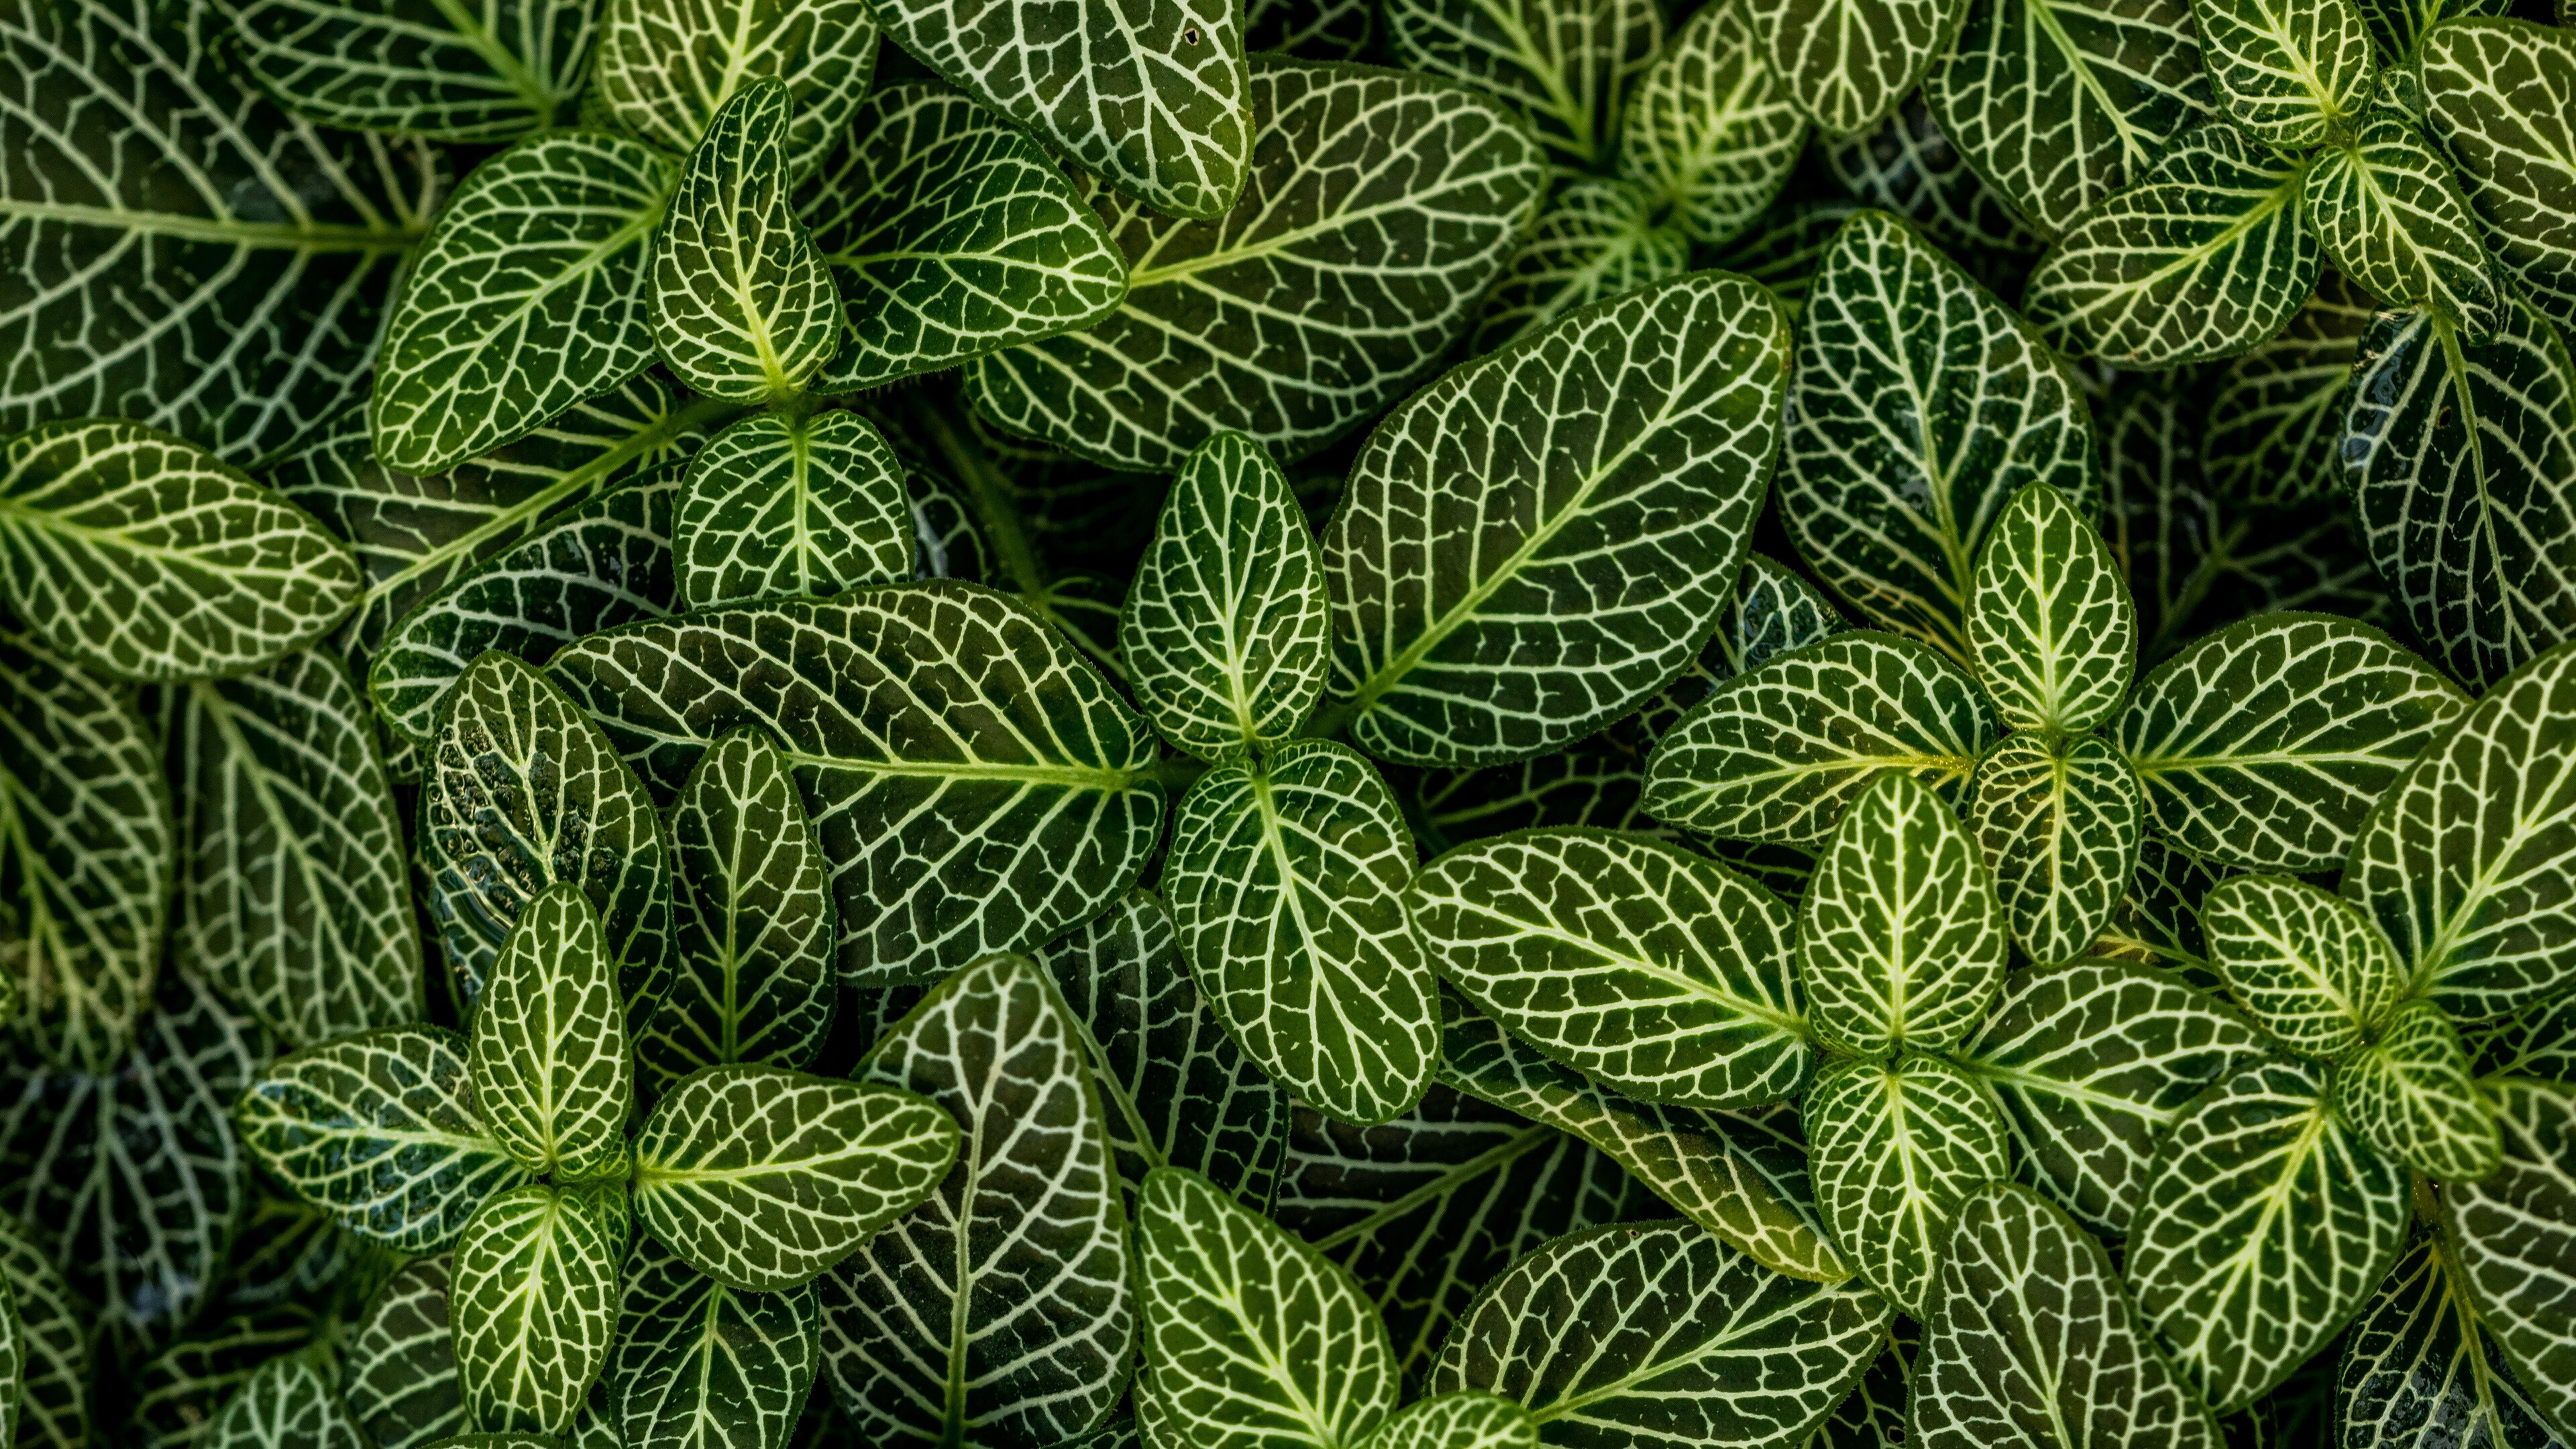 Leaves: A part of a plant that's usually green and attached to it by a stem or stalk. 3840x2160 4K Wallpaper.